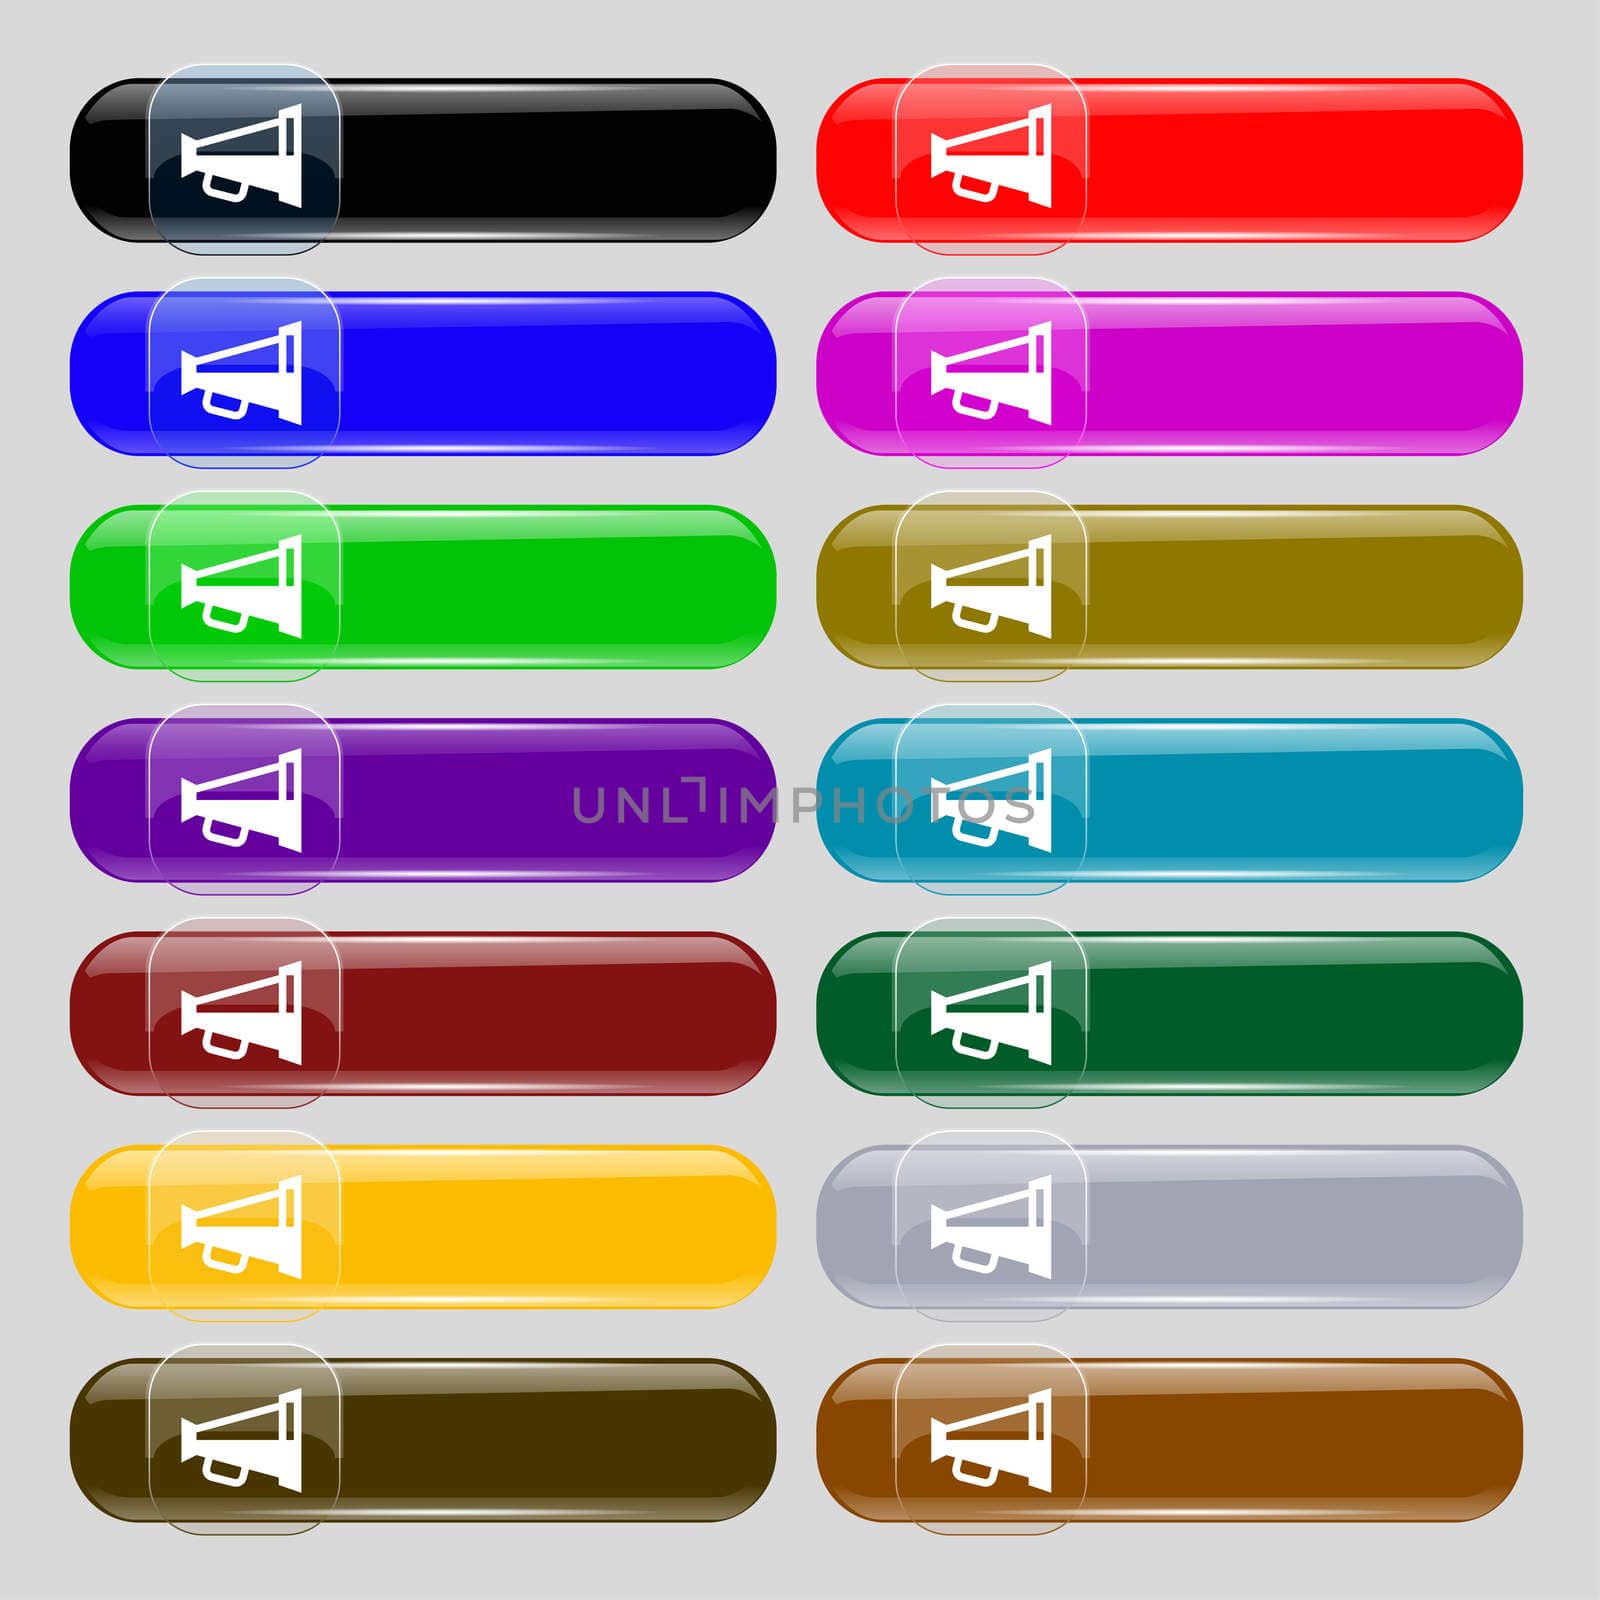 Megaphone soon, Loudspeaker icon sign. Set from fourteen multi-colored glass buttons with place for text. illustration